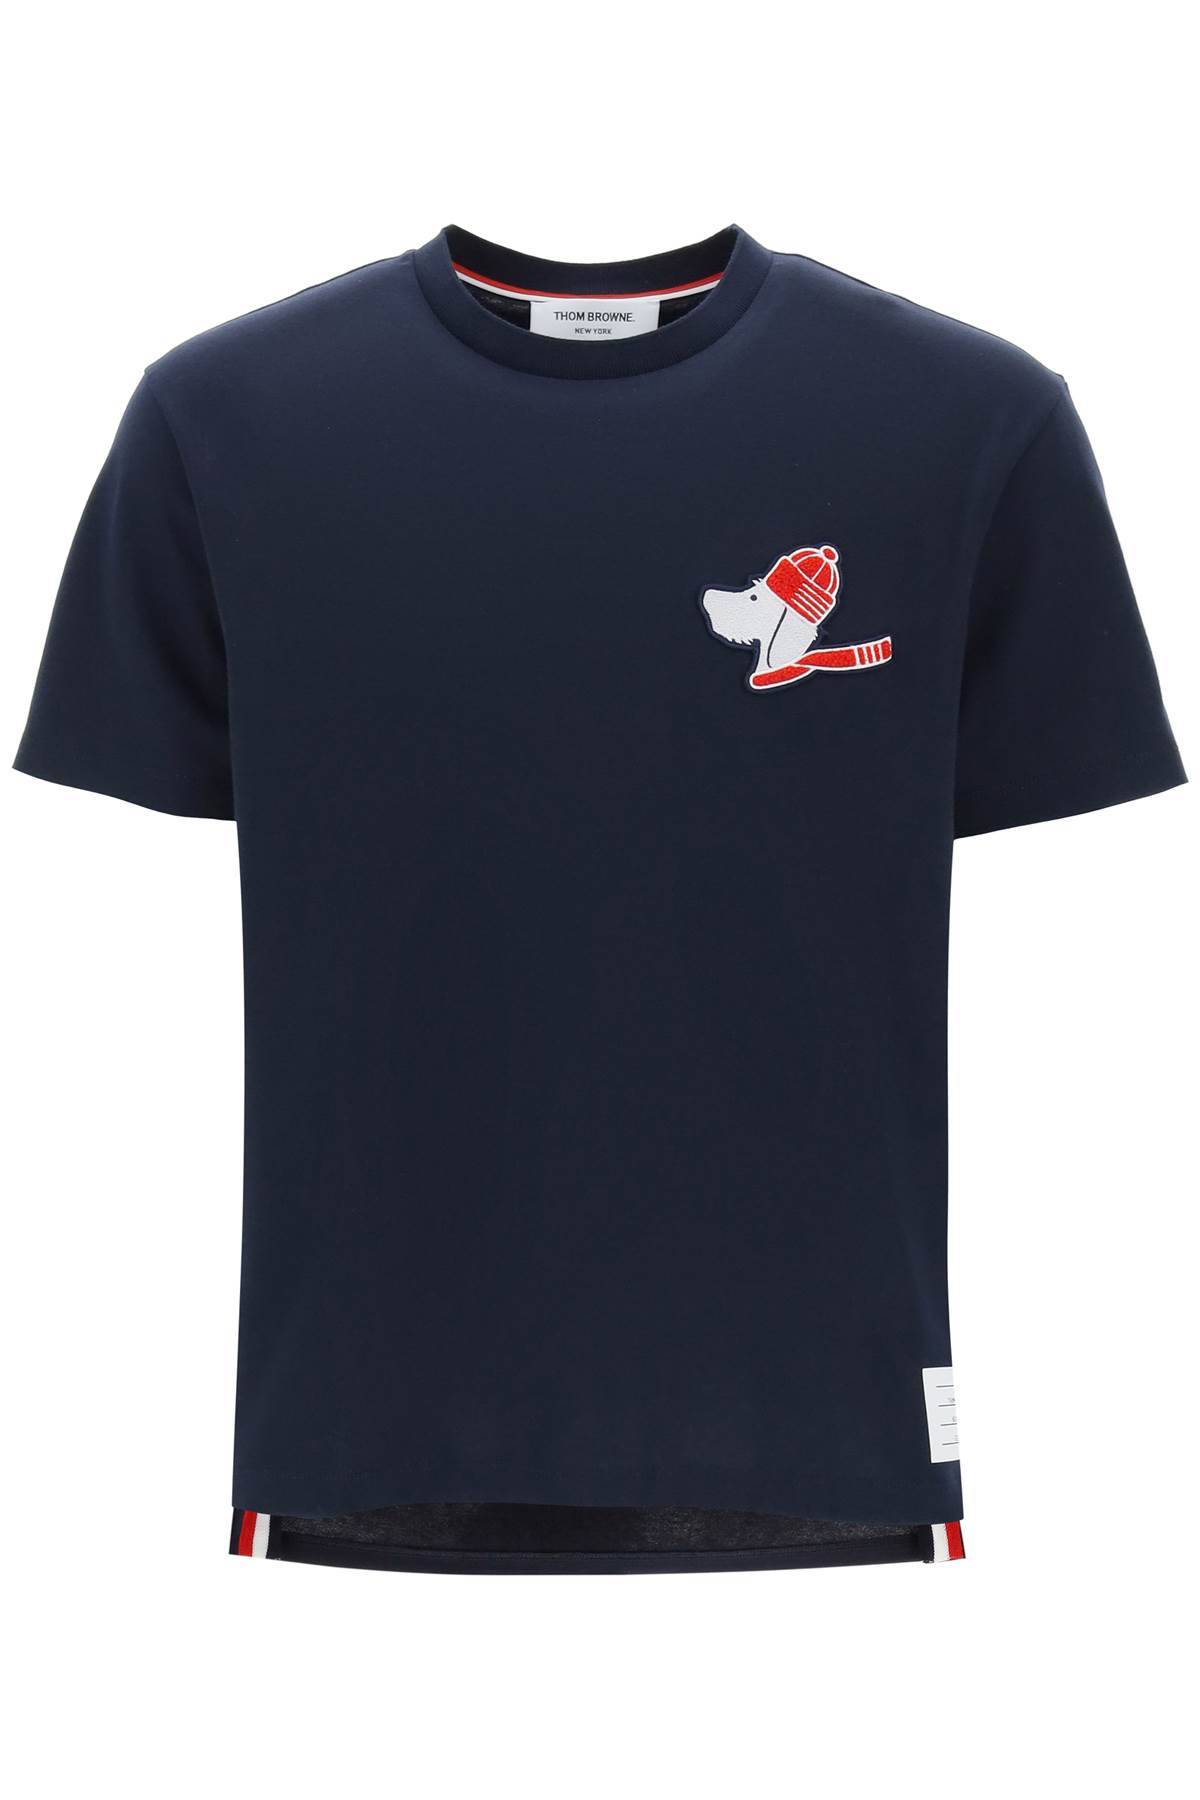 Thom Browne THOM BROWNE hector patch t-shirt with